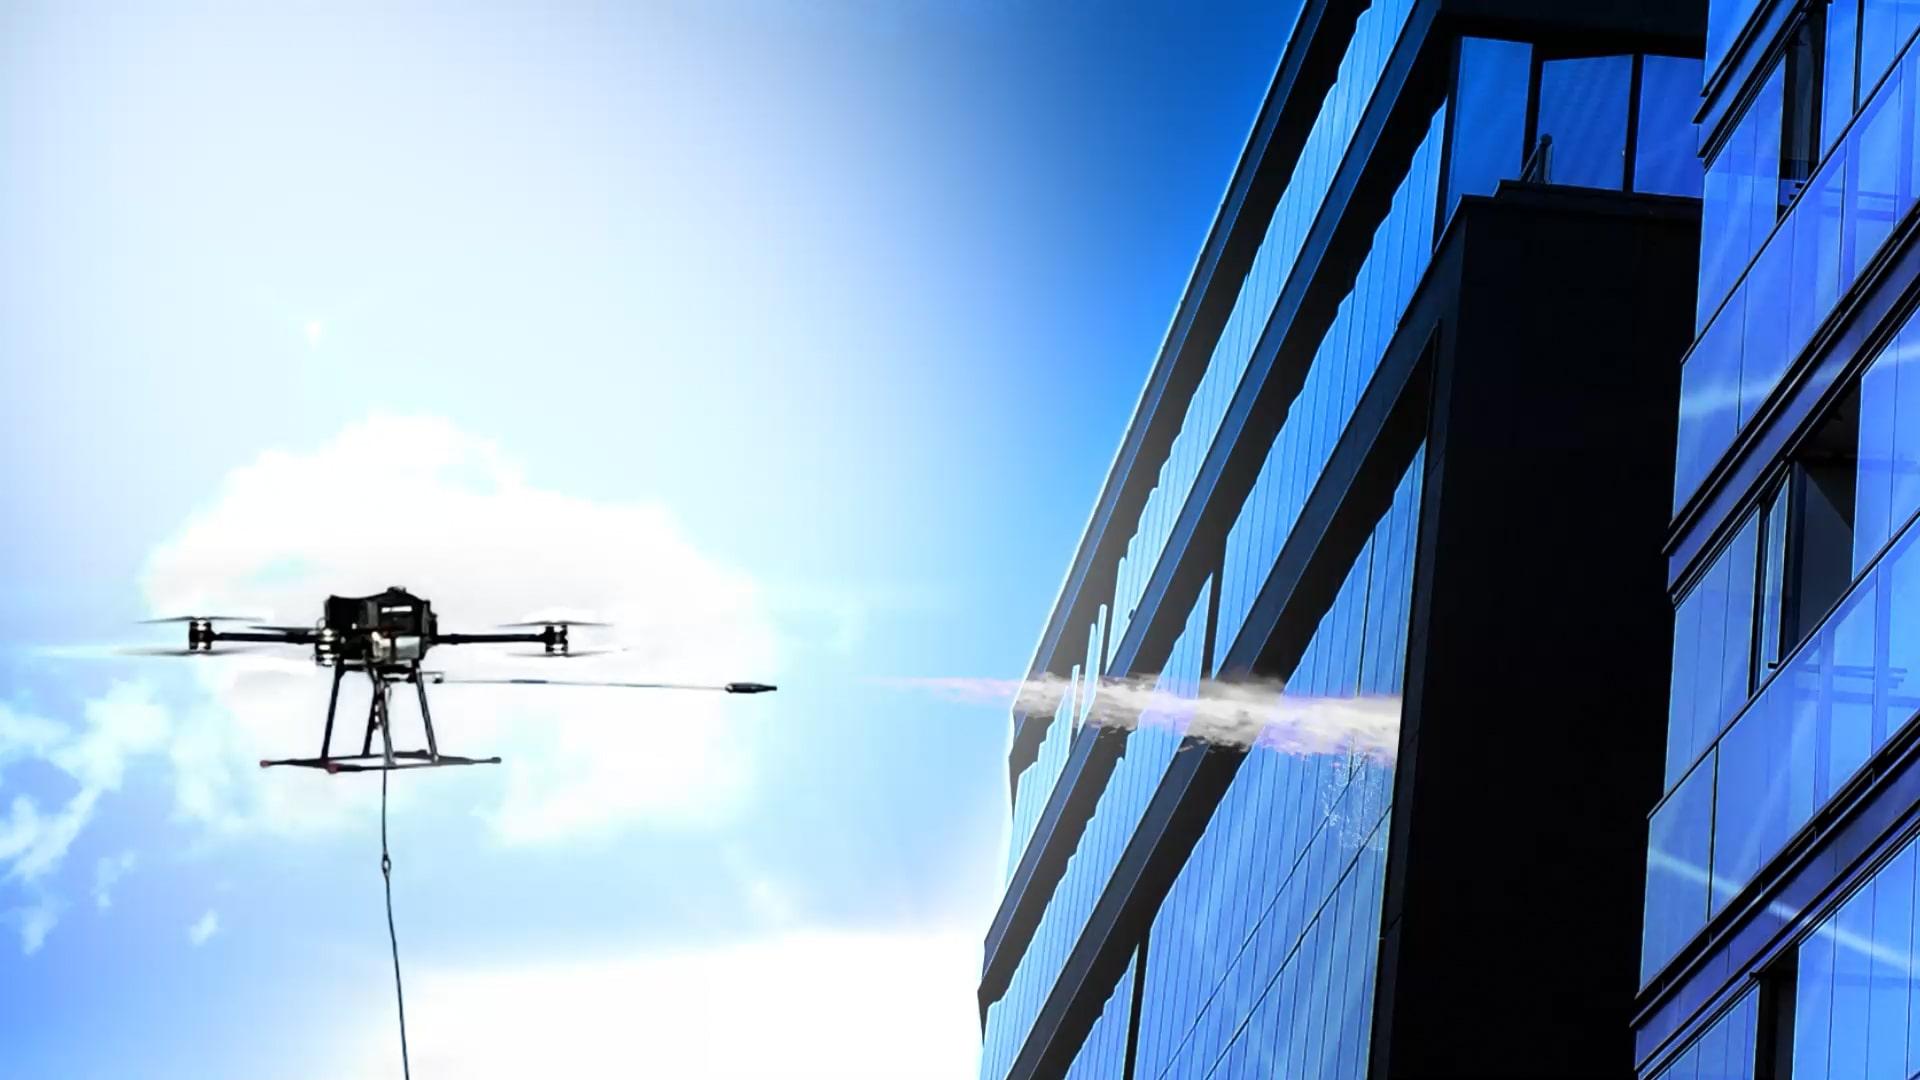 Drone equipped with a high-pressure washer cleaning a large mirrored building on a sunny day.